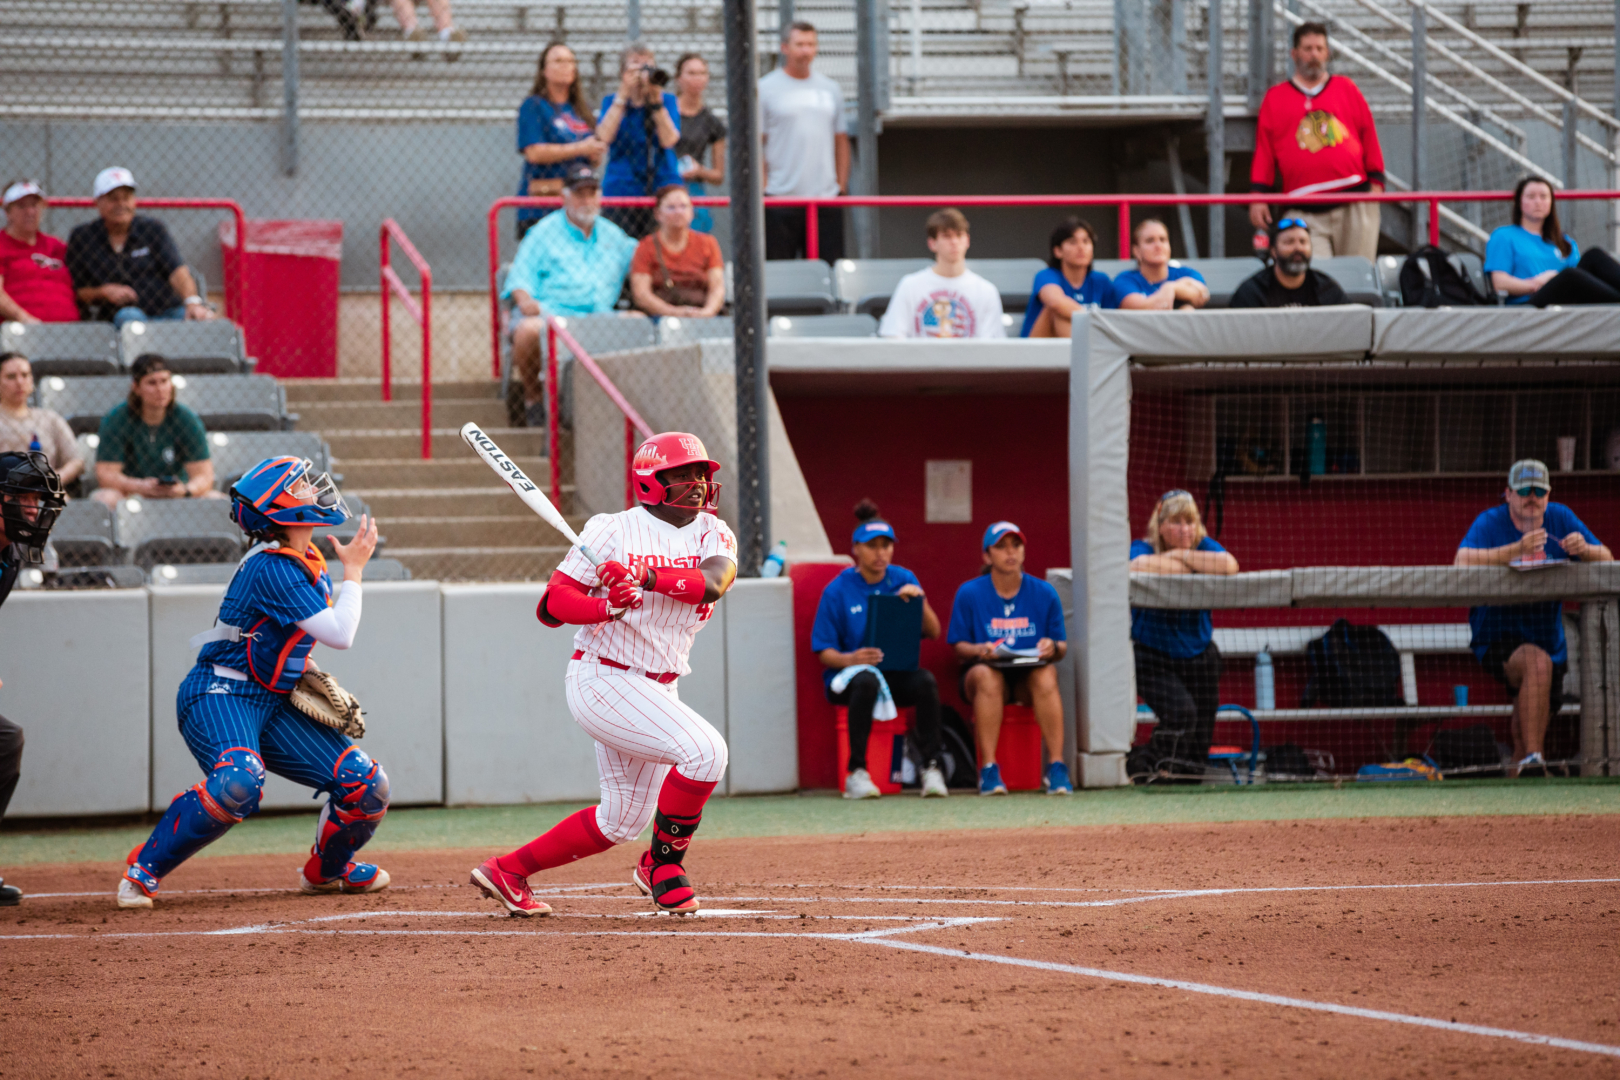 UH softball was swept in its three-game road series against Baylor over the weekend. | Oscar Herrera/The Cougar